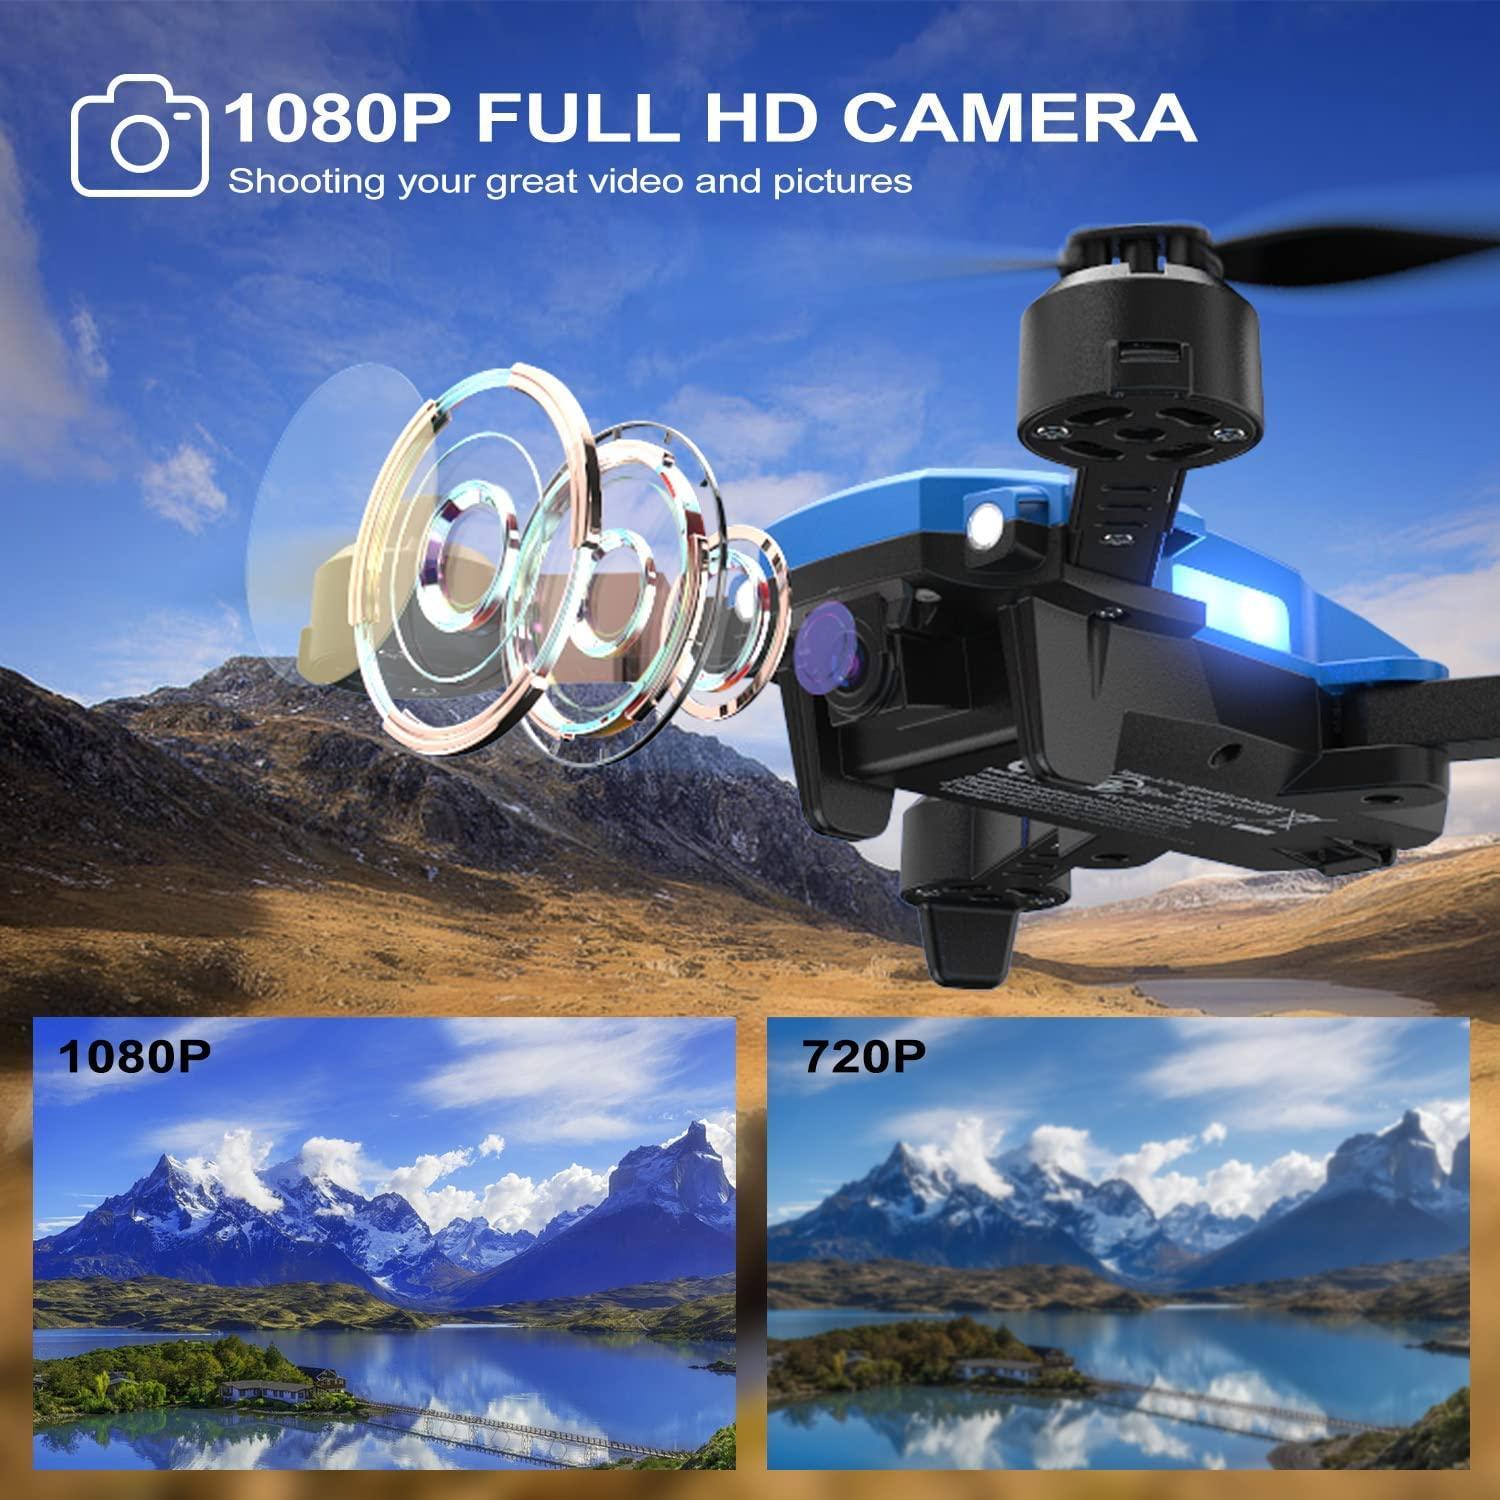 GGBOND G10/G20 Drone - with Camera for Kids 1080P HD FPV,Mini RC Drone for Beginners with 3D Flips,Headless Mode,Voice Control,One Key Sart, Speed Adjust, Altitude Hold - RCDrone